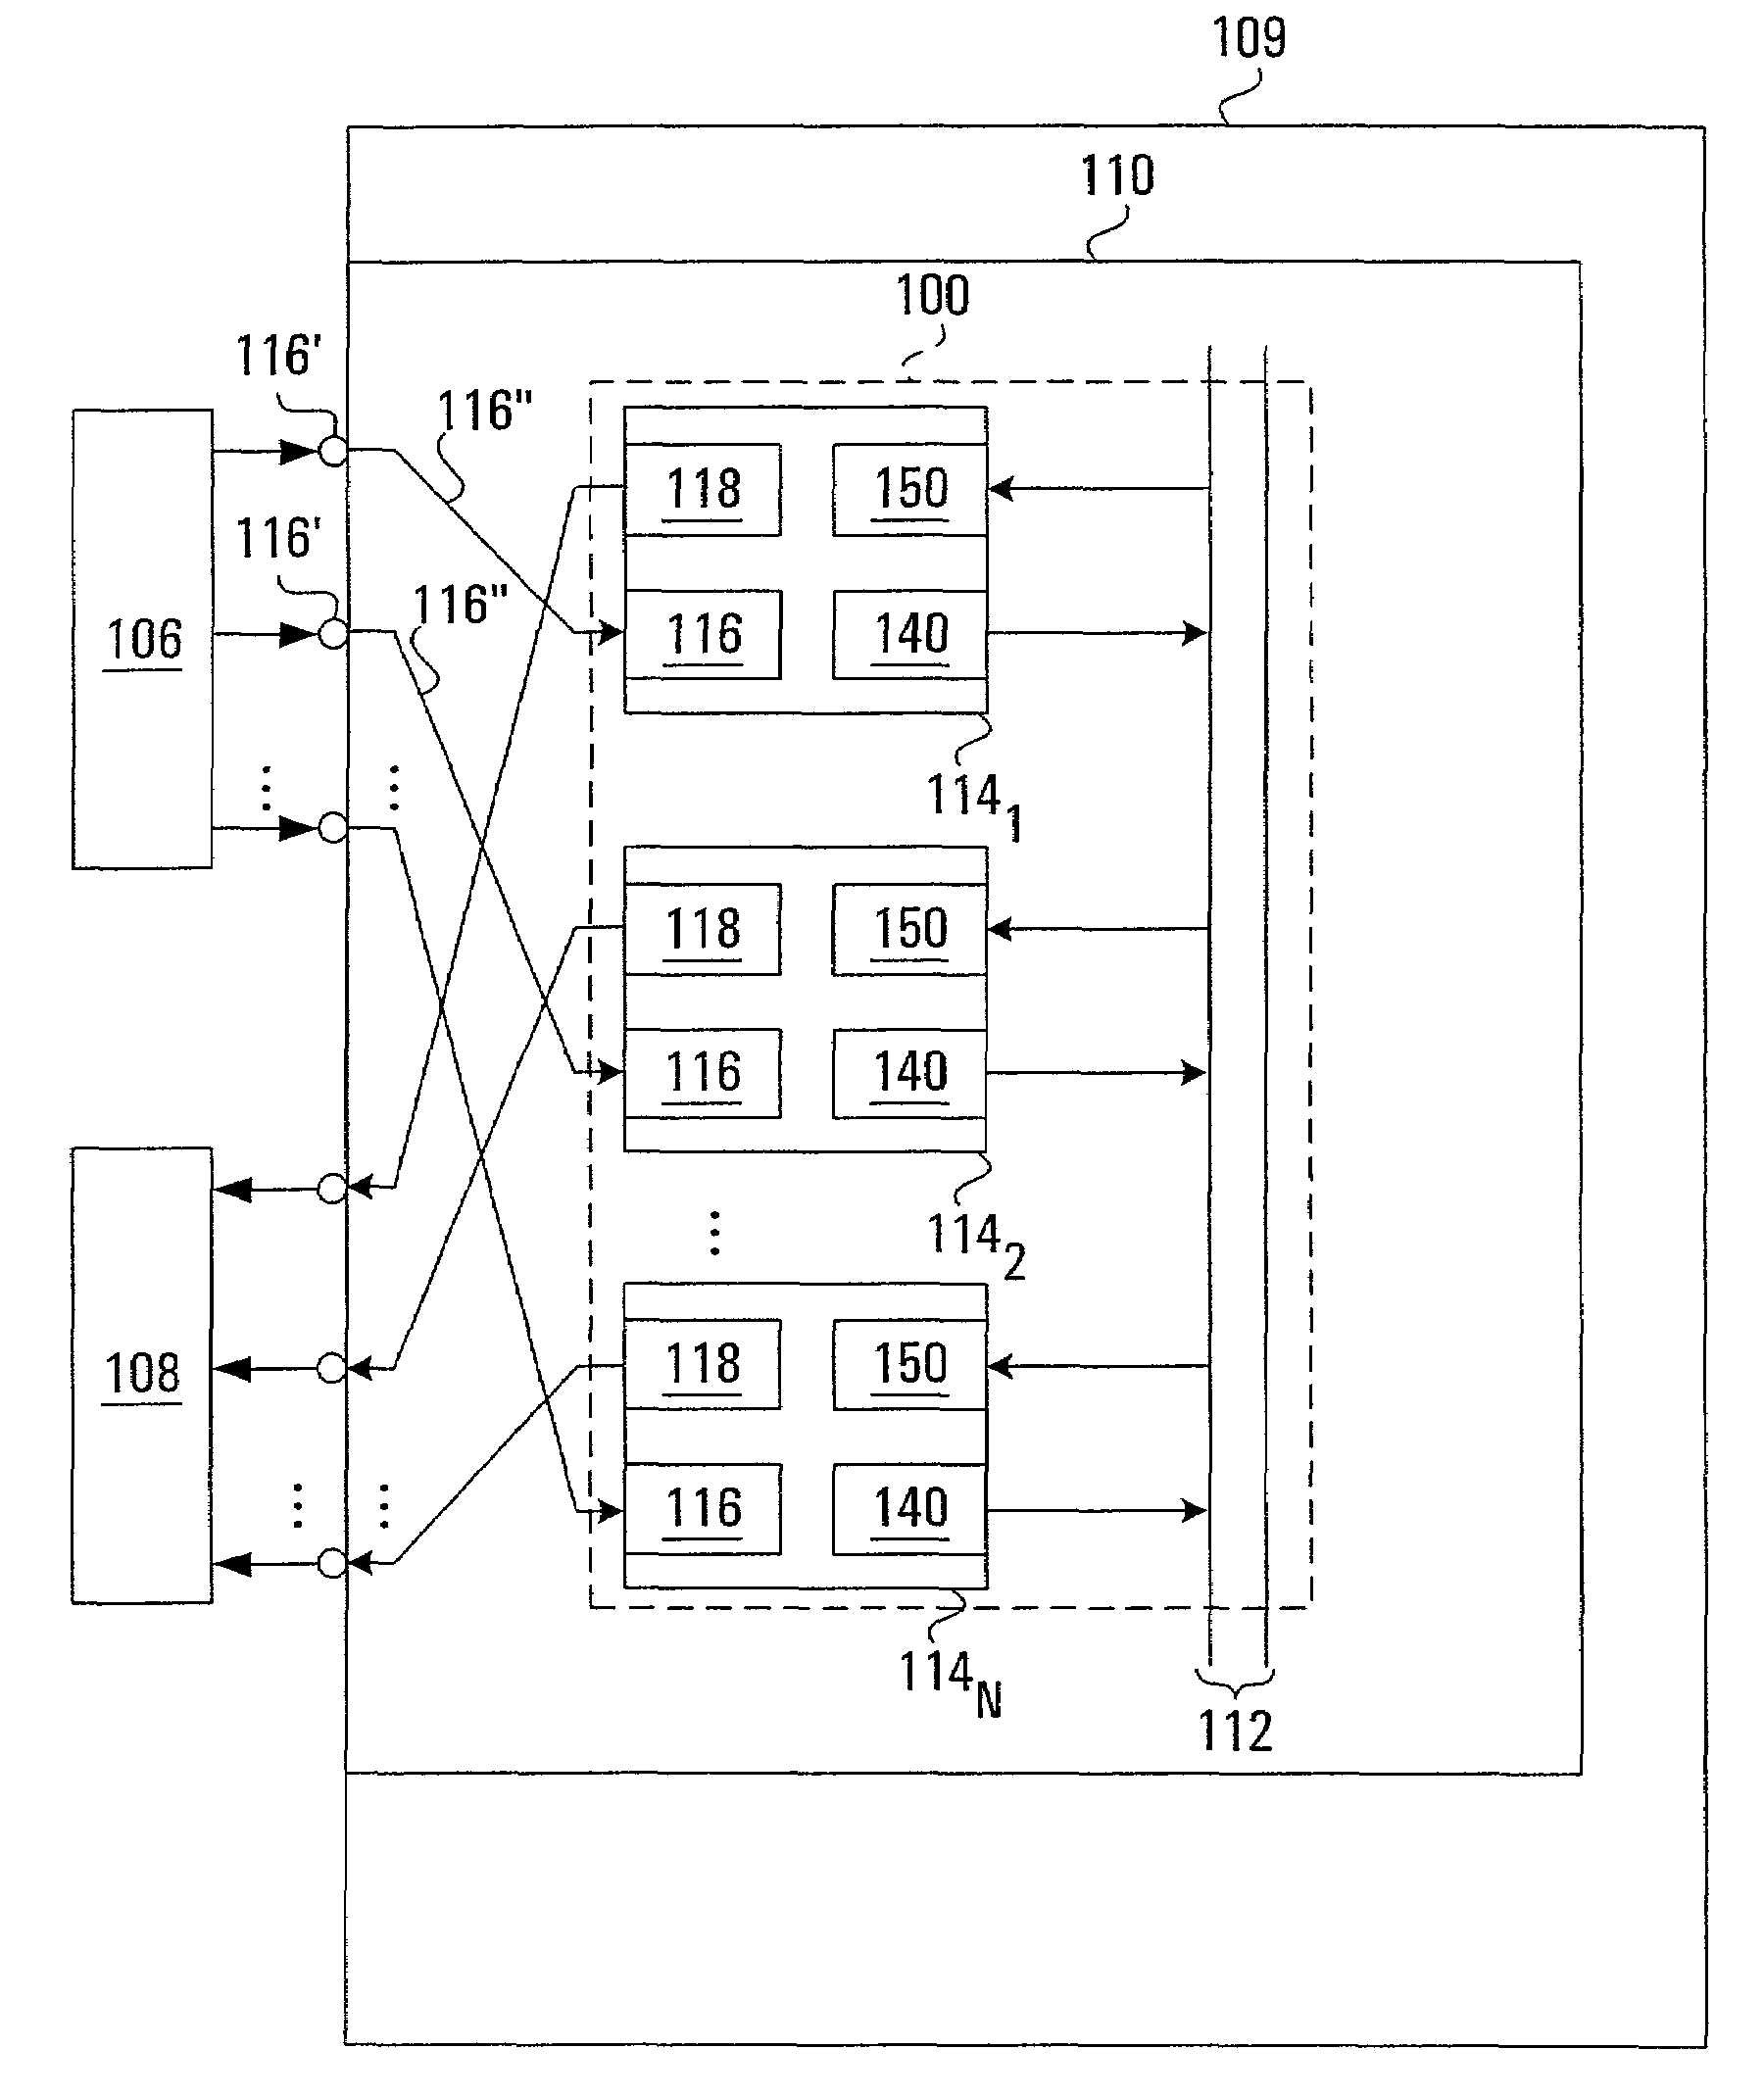 Cell-based switch fabric with inter-cell control for regulating packet flow